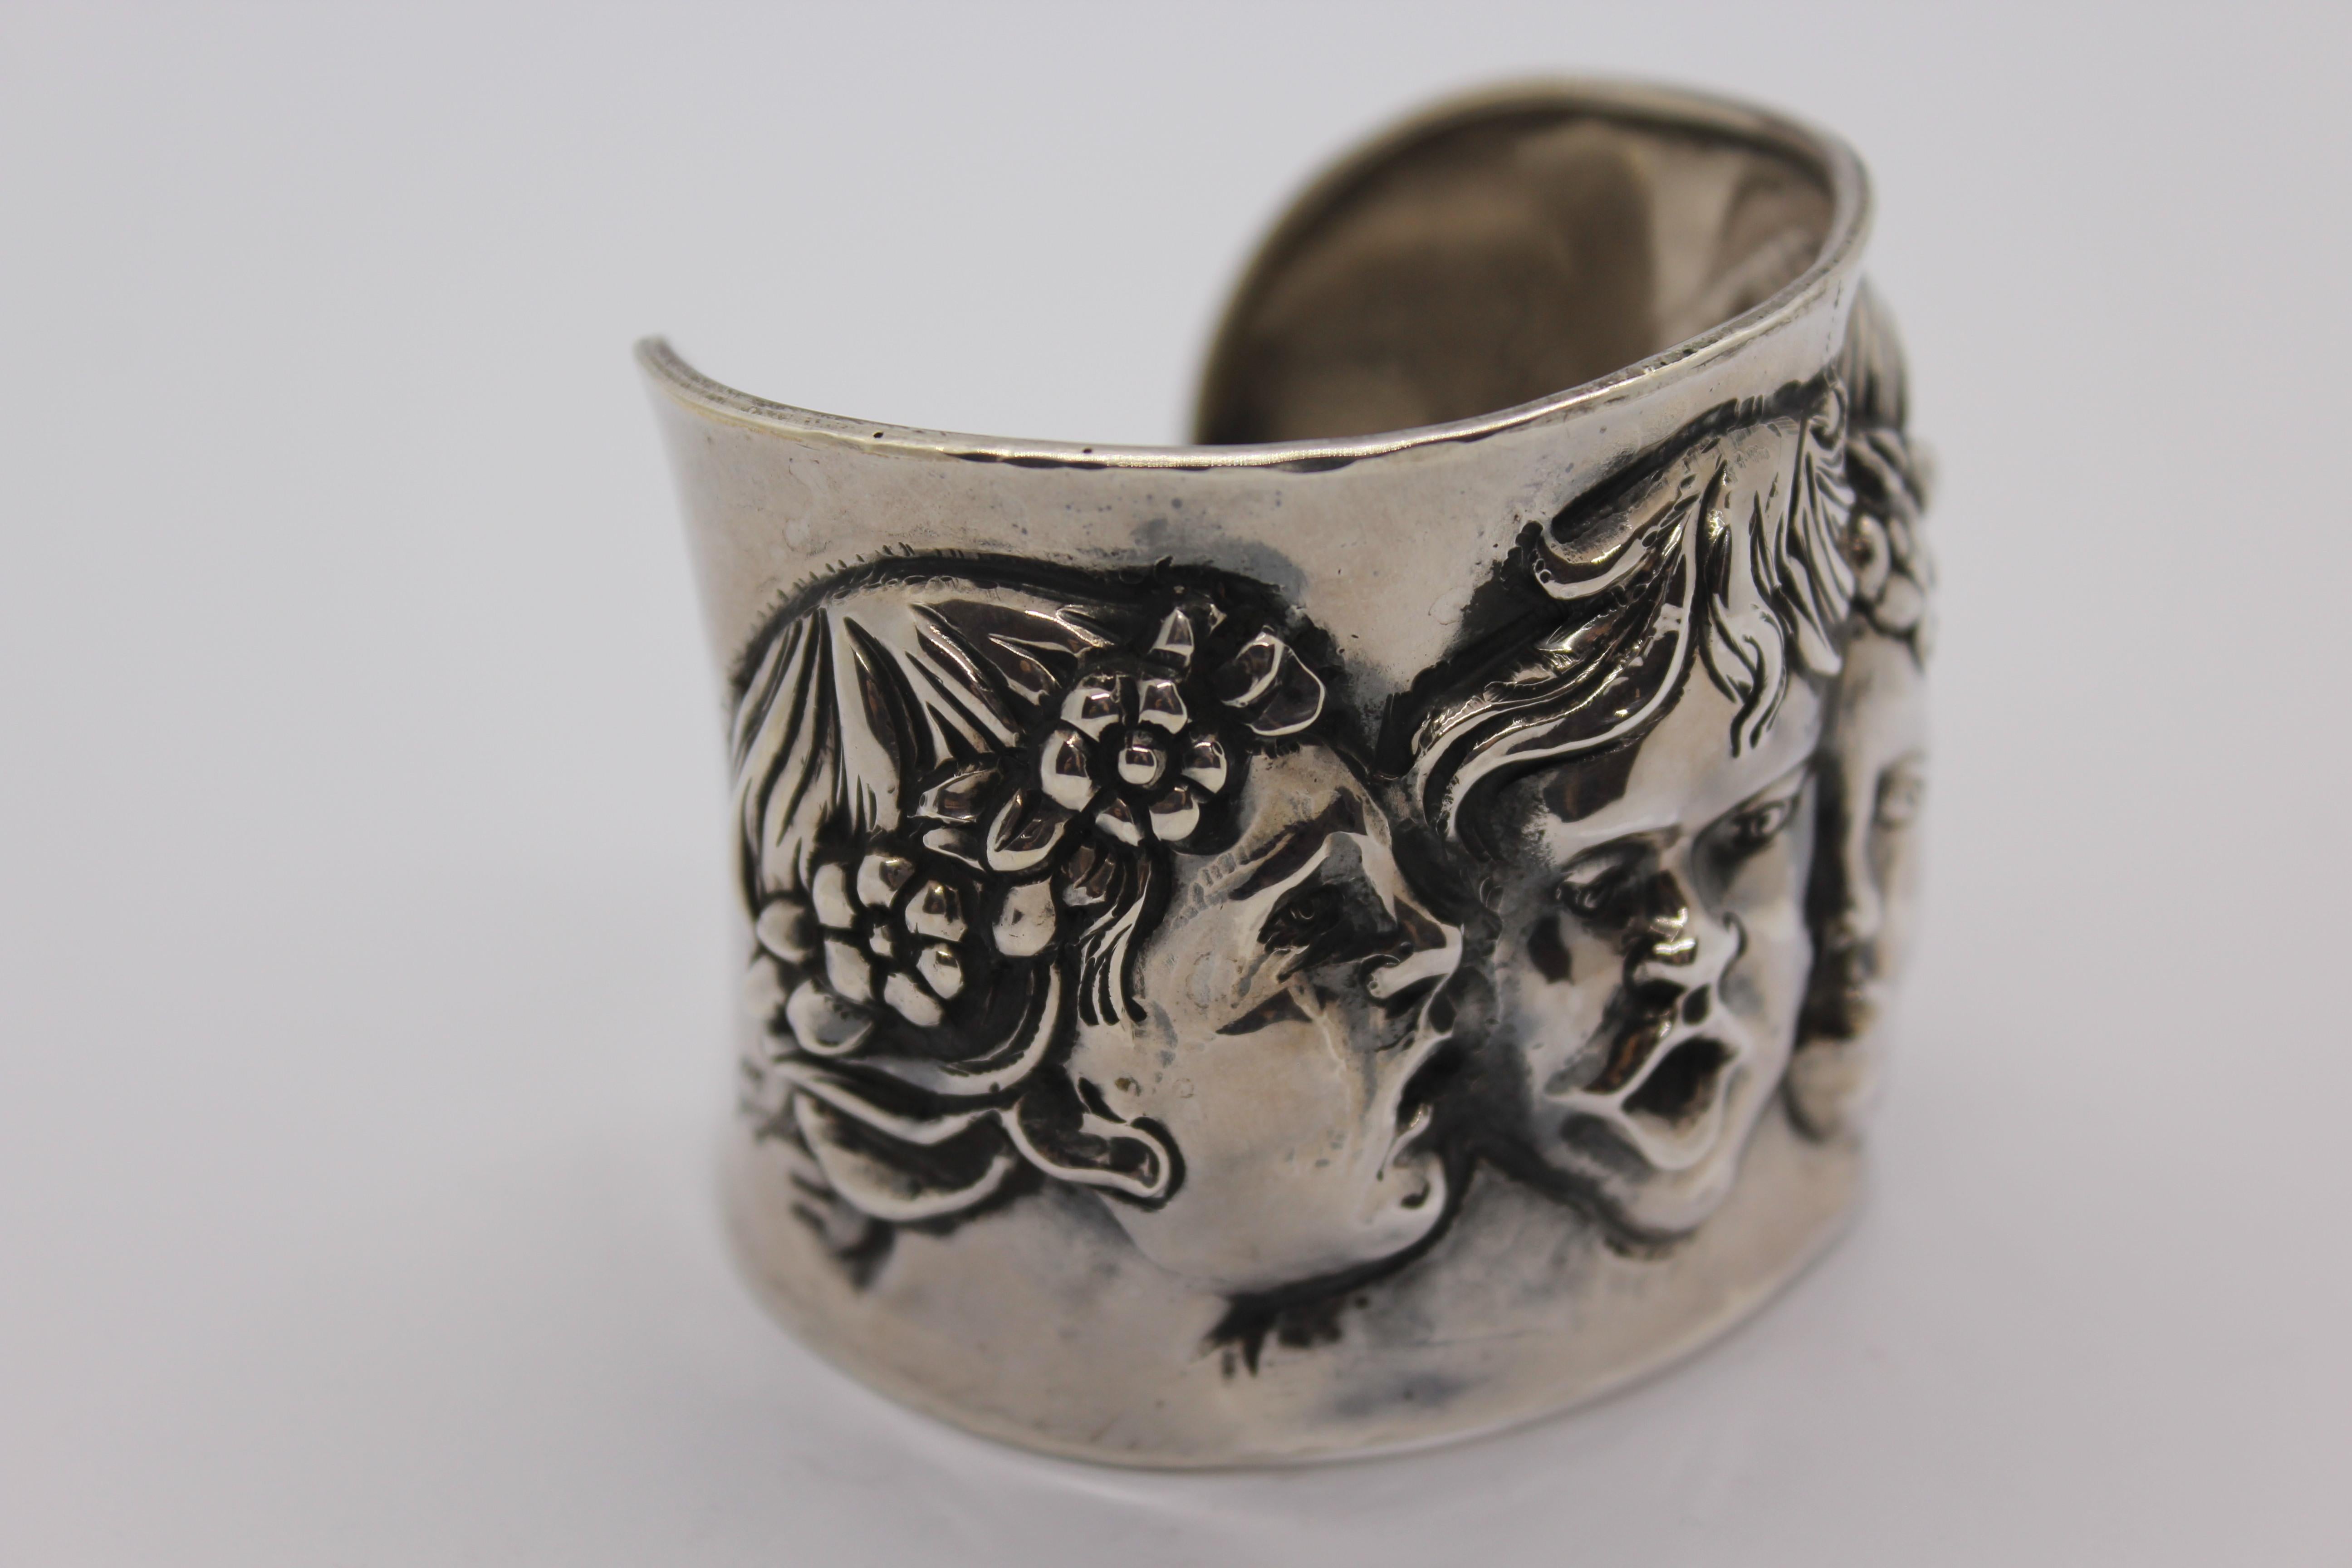 The “Putti” bracelet is part of our jewelry line “Homage to the ancestors”, inspired by famous oeuvres of great artists. All our sterling silver pieces of jewelry are handmade: it means that none is like the other. As a matter of fact, our aim is to